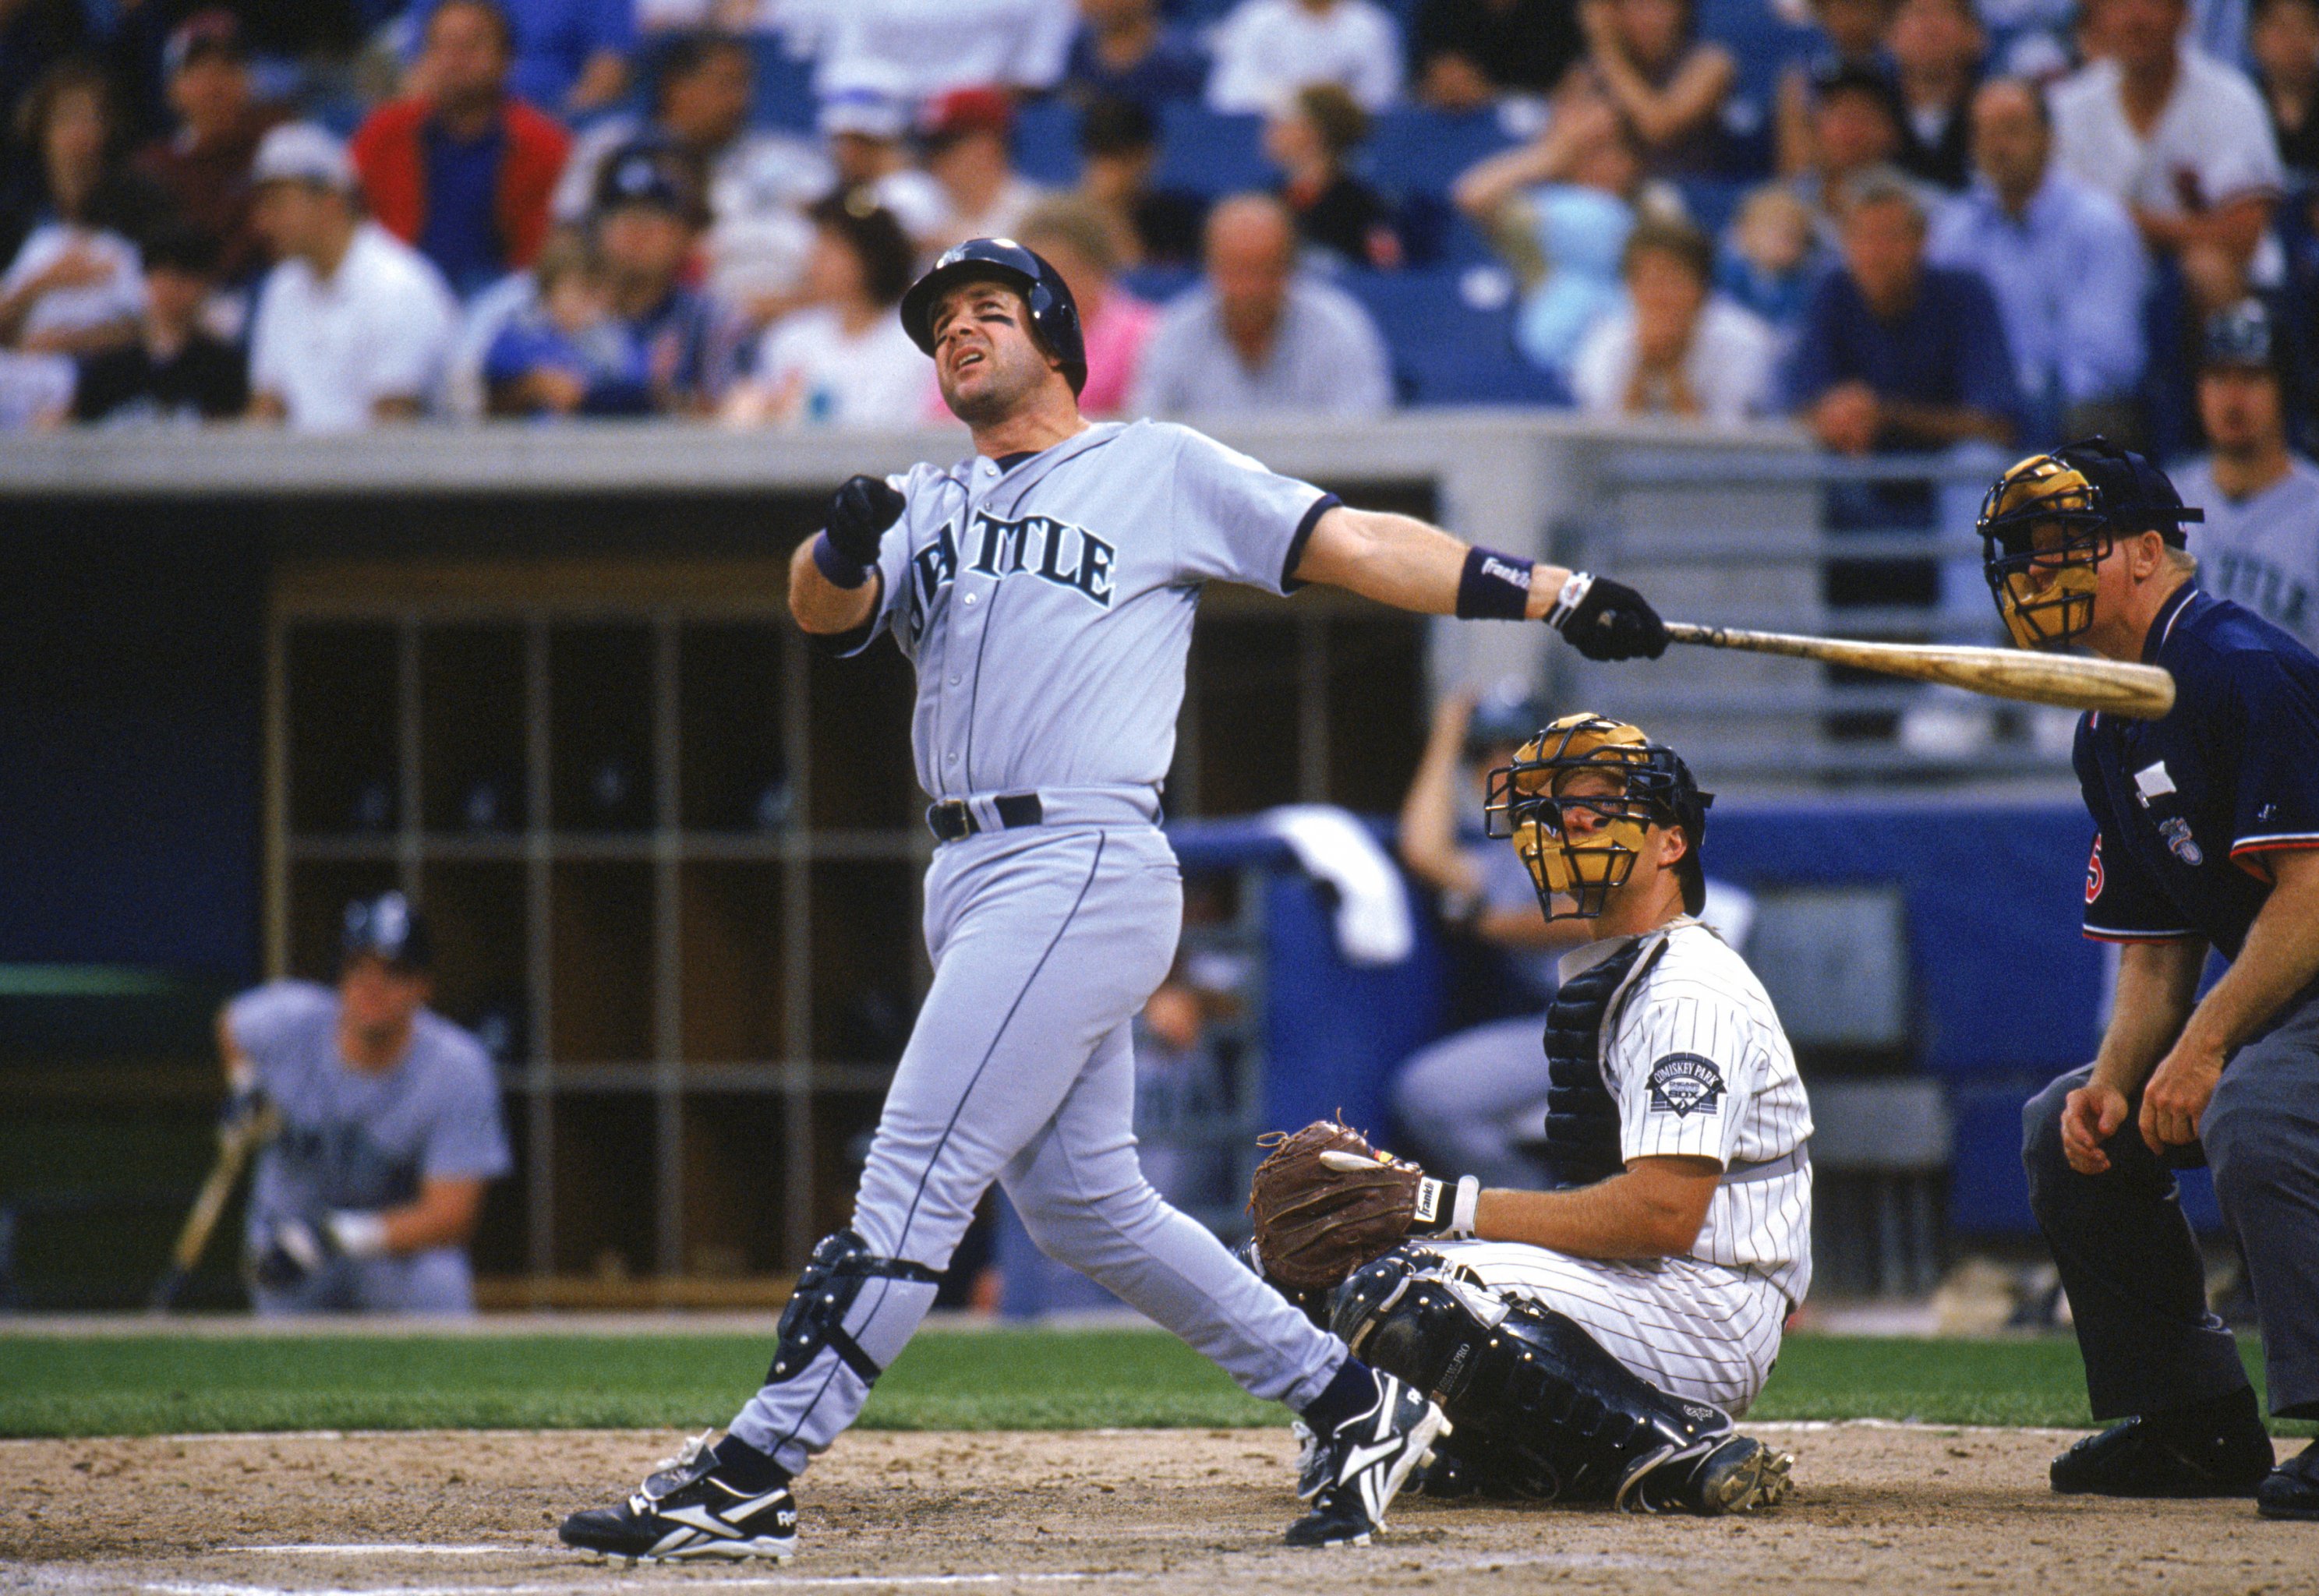 Edgar Martinez and Larry Walker deserve enshrinement in the Hall of Fame -  Beyond the Box Score